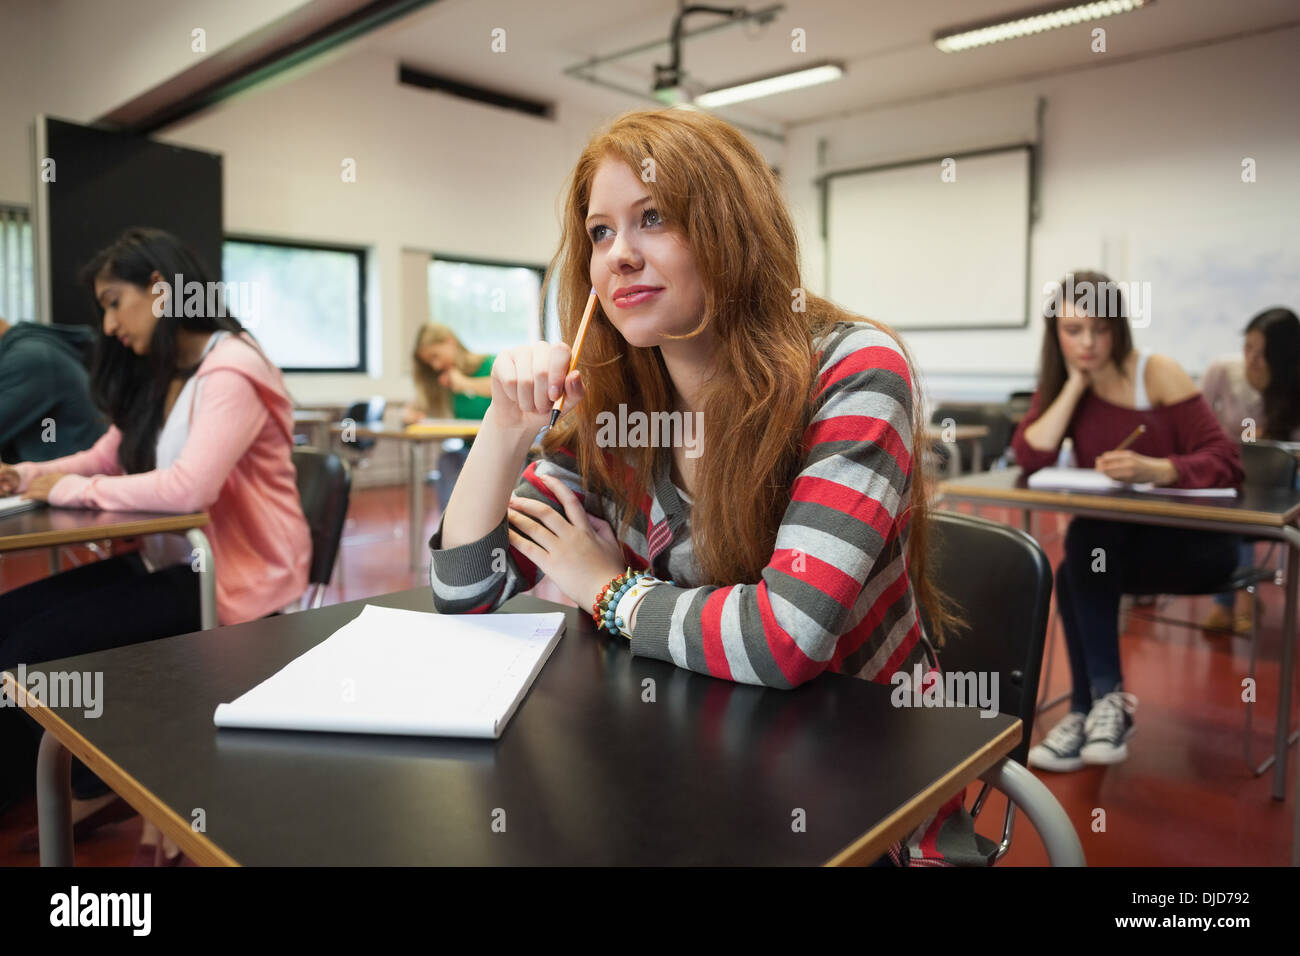 Focused female student listening in class Stock Photo